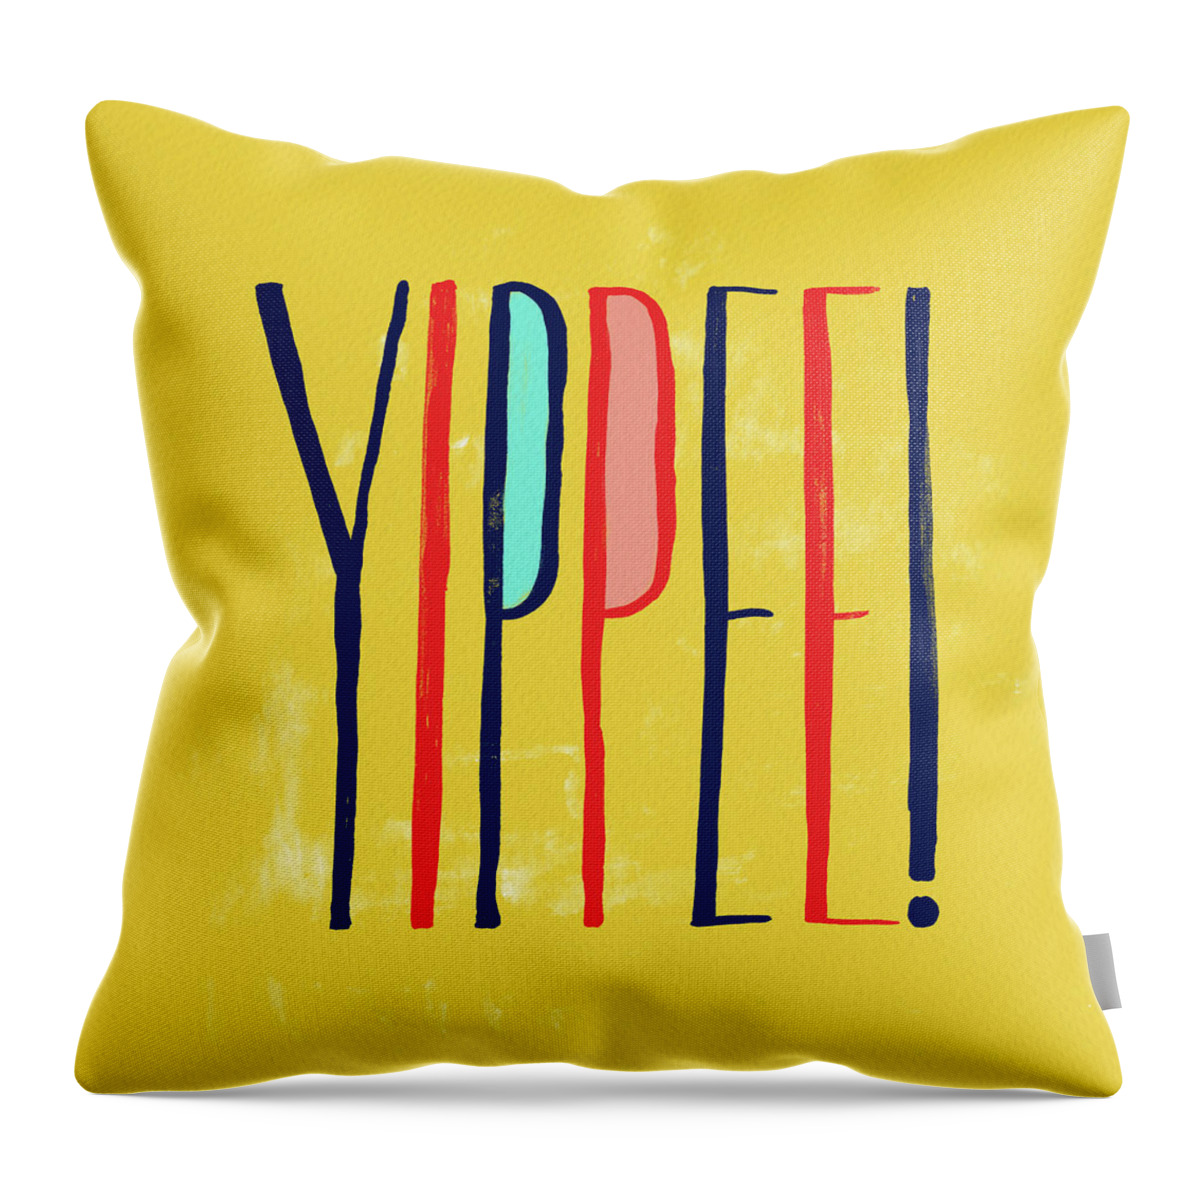 Yippee Throw Pillow featuring the painting Yippee by Jen Montgomery